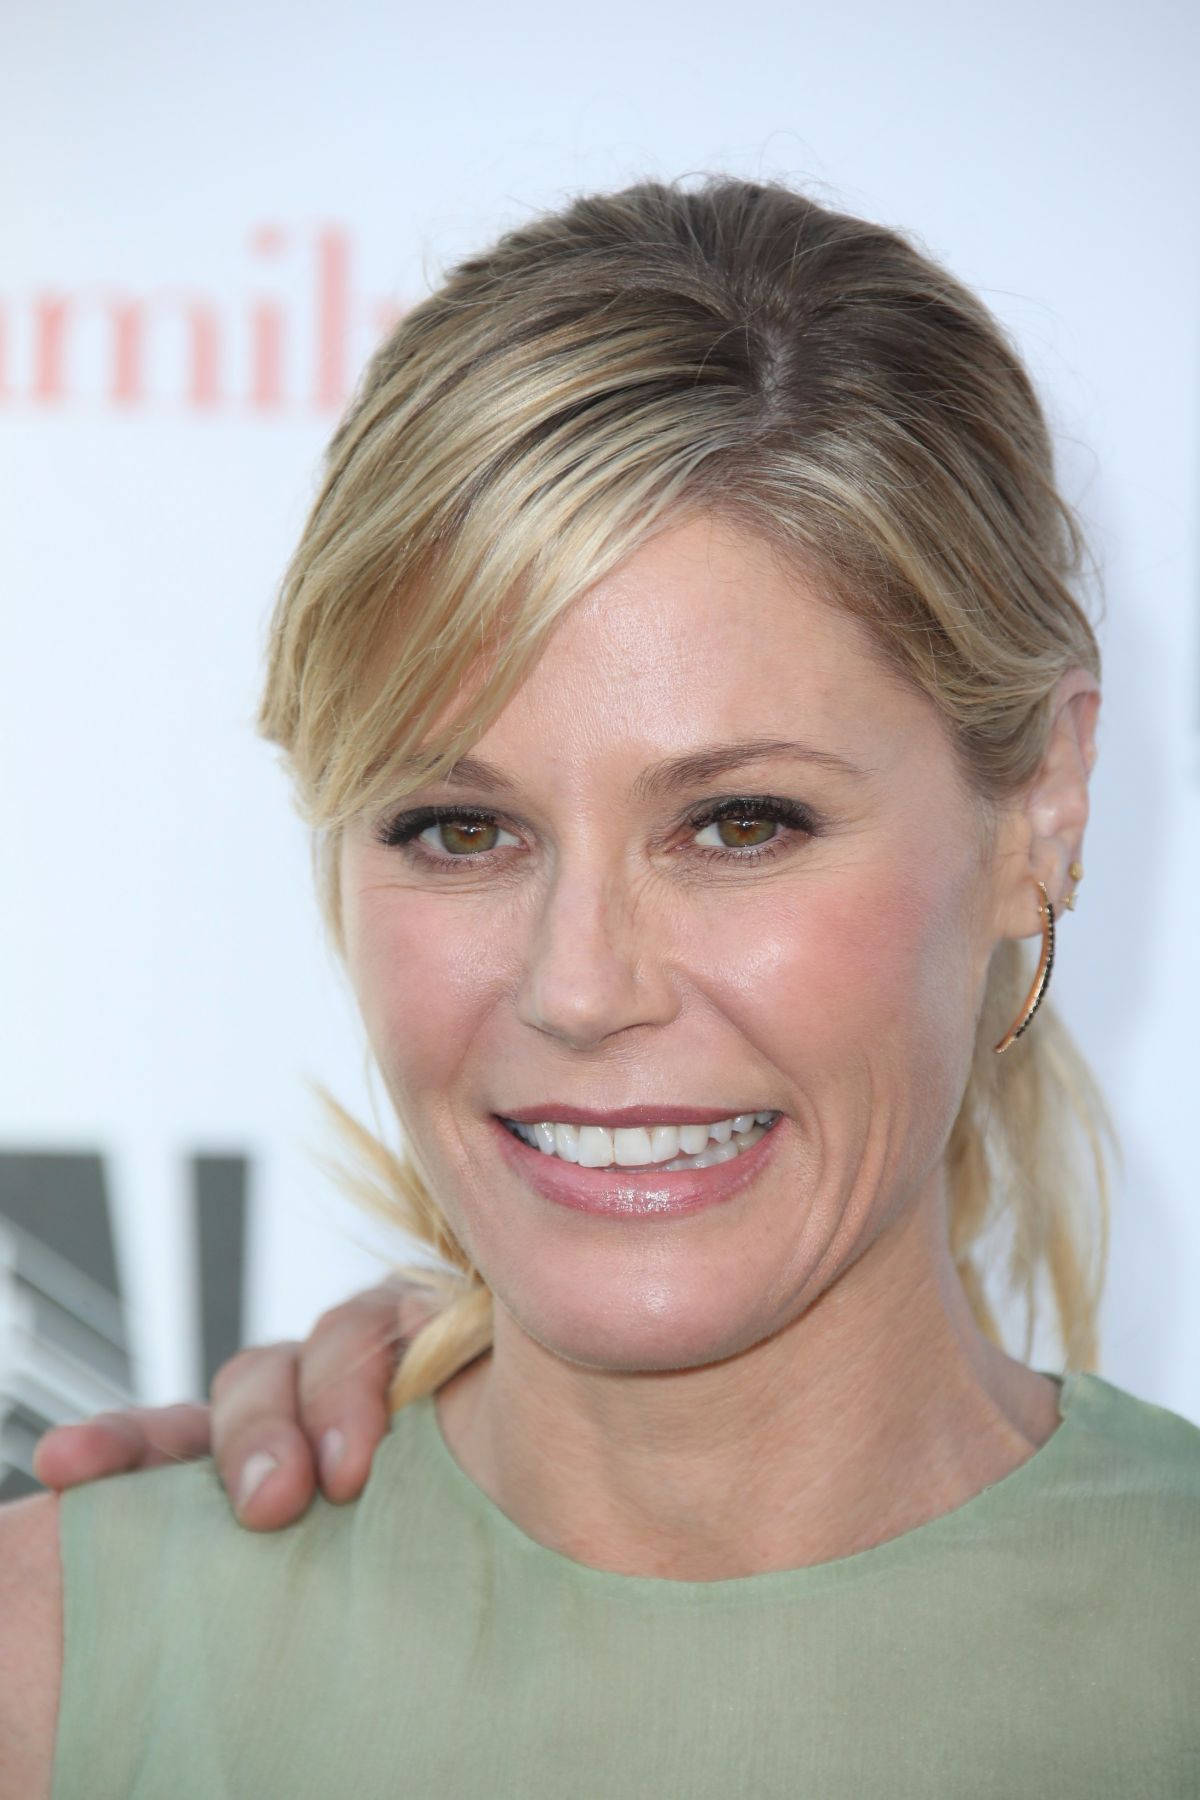 Juliebowen Log Awkwardt. (assuming This Is The Desired Phrase For A Computer Or Mobile Wallpaper) Wallpaper